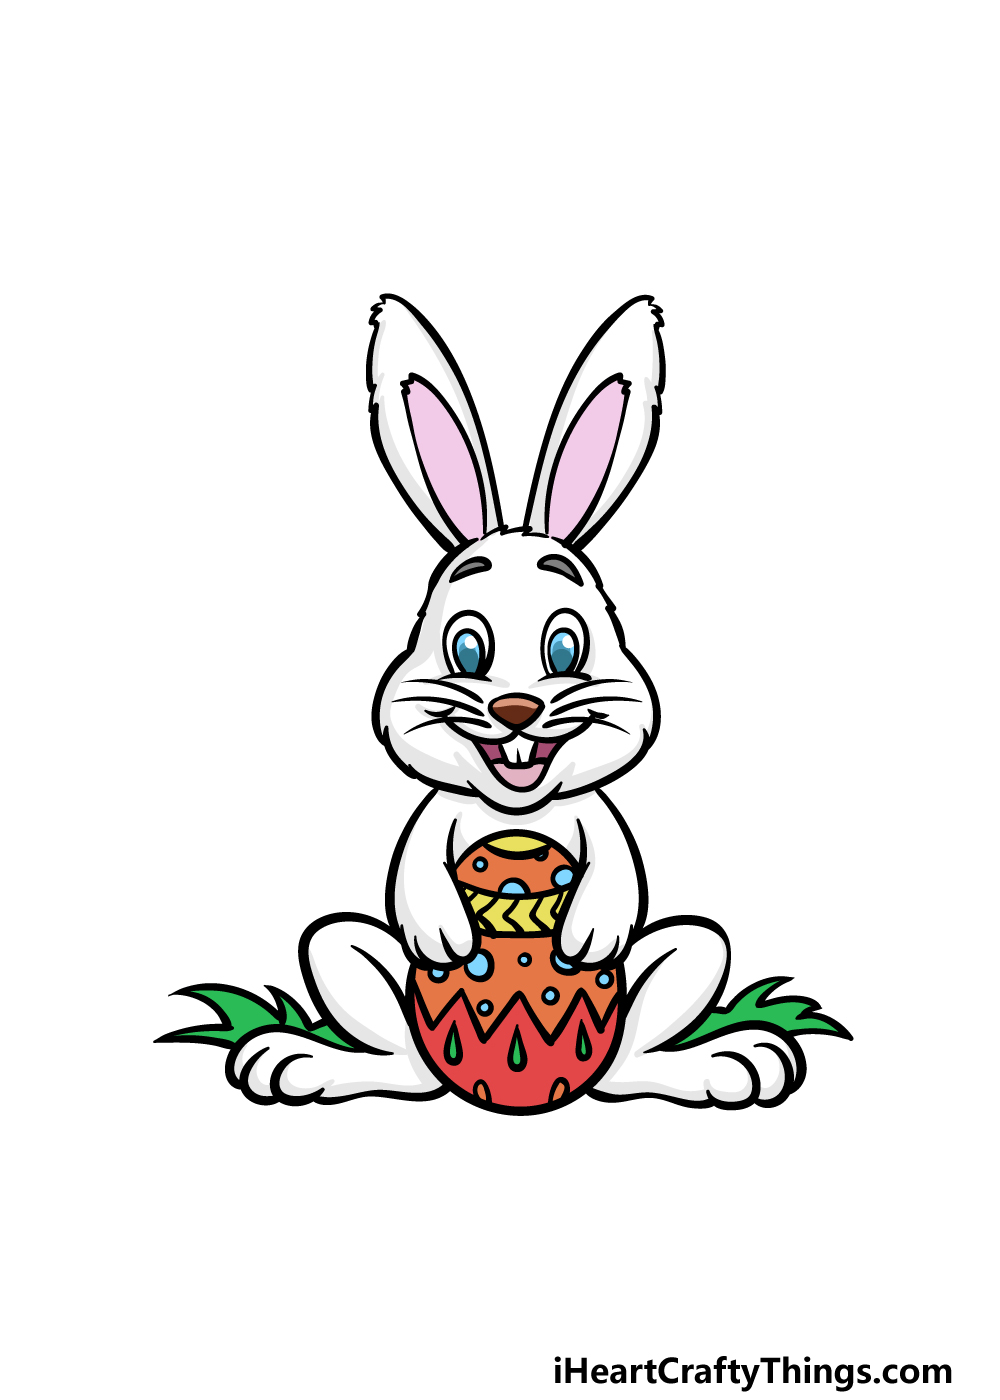 Blur Clipart Easter Bunny - Rabbit Draw Black And White Transparent PNG -  386x550 - Free Download on NicePNG